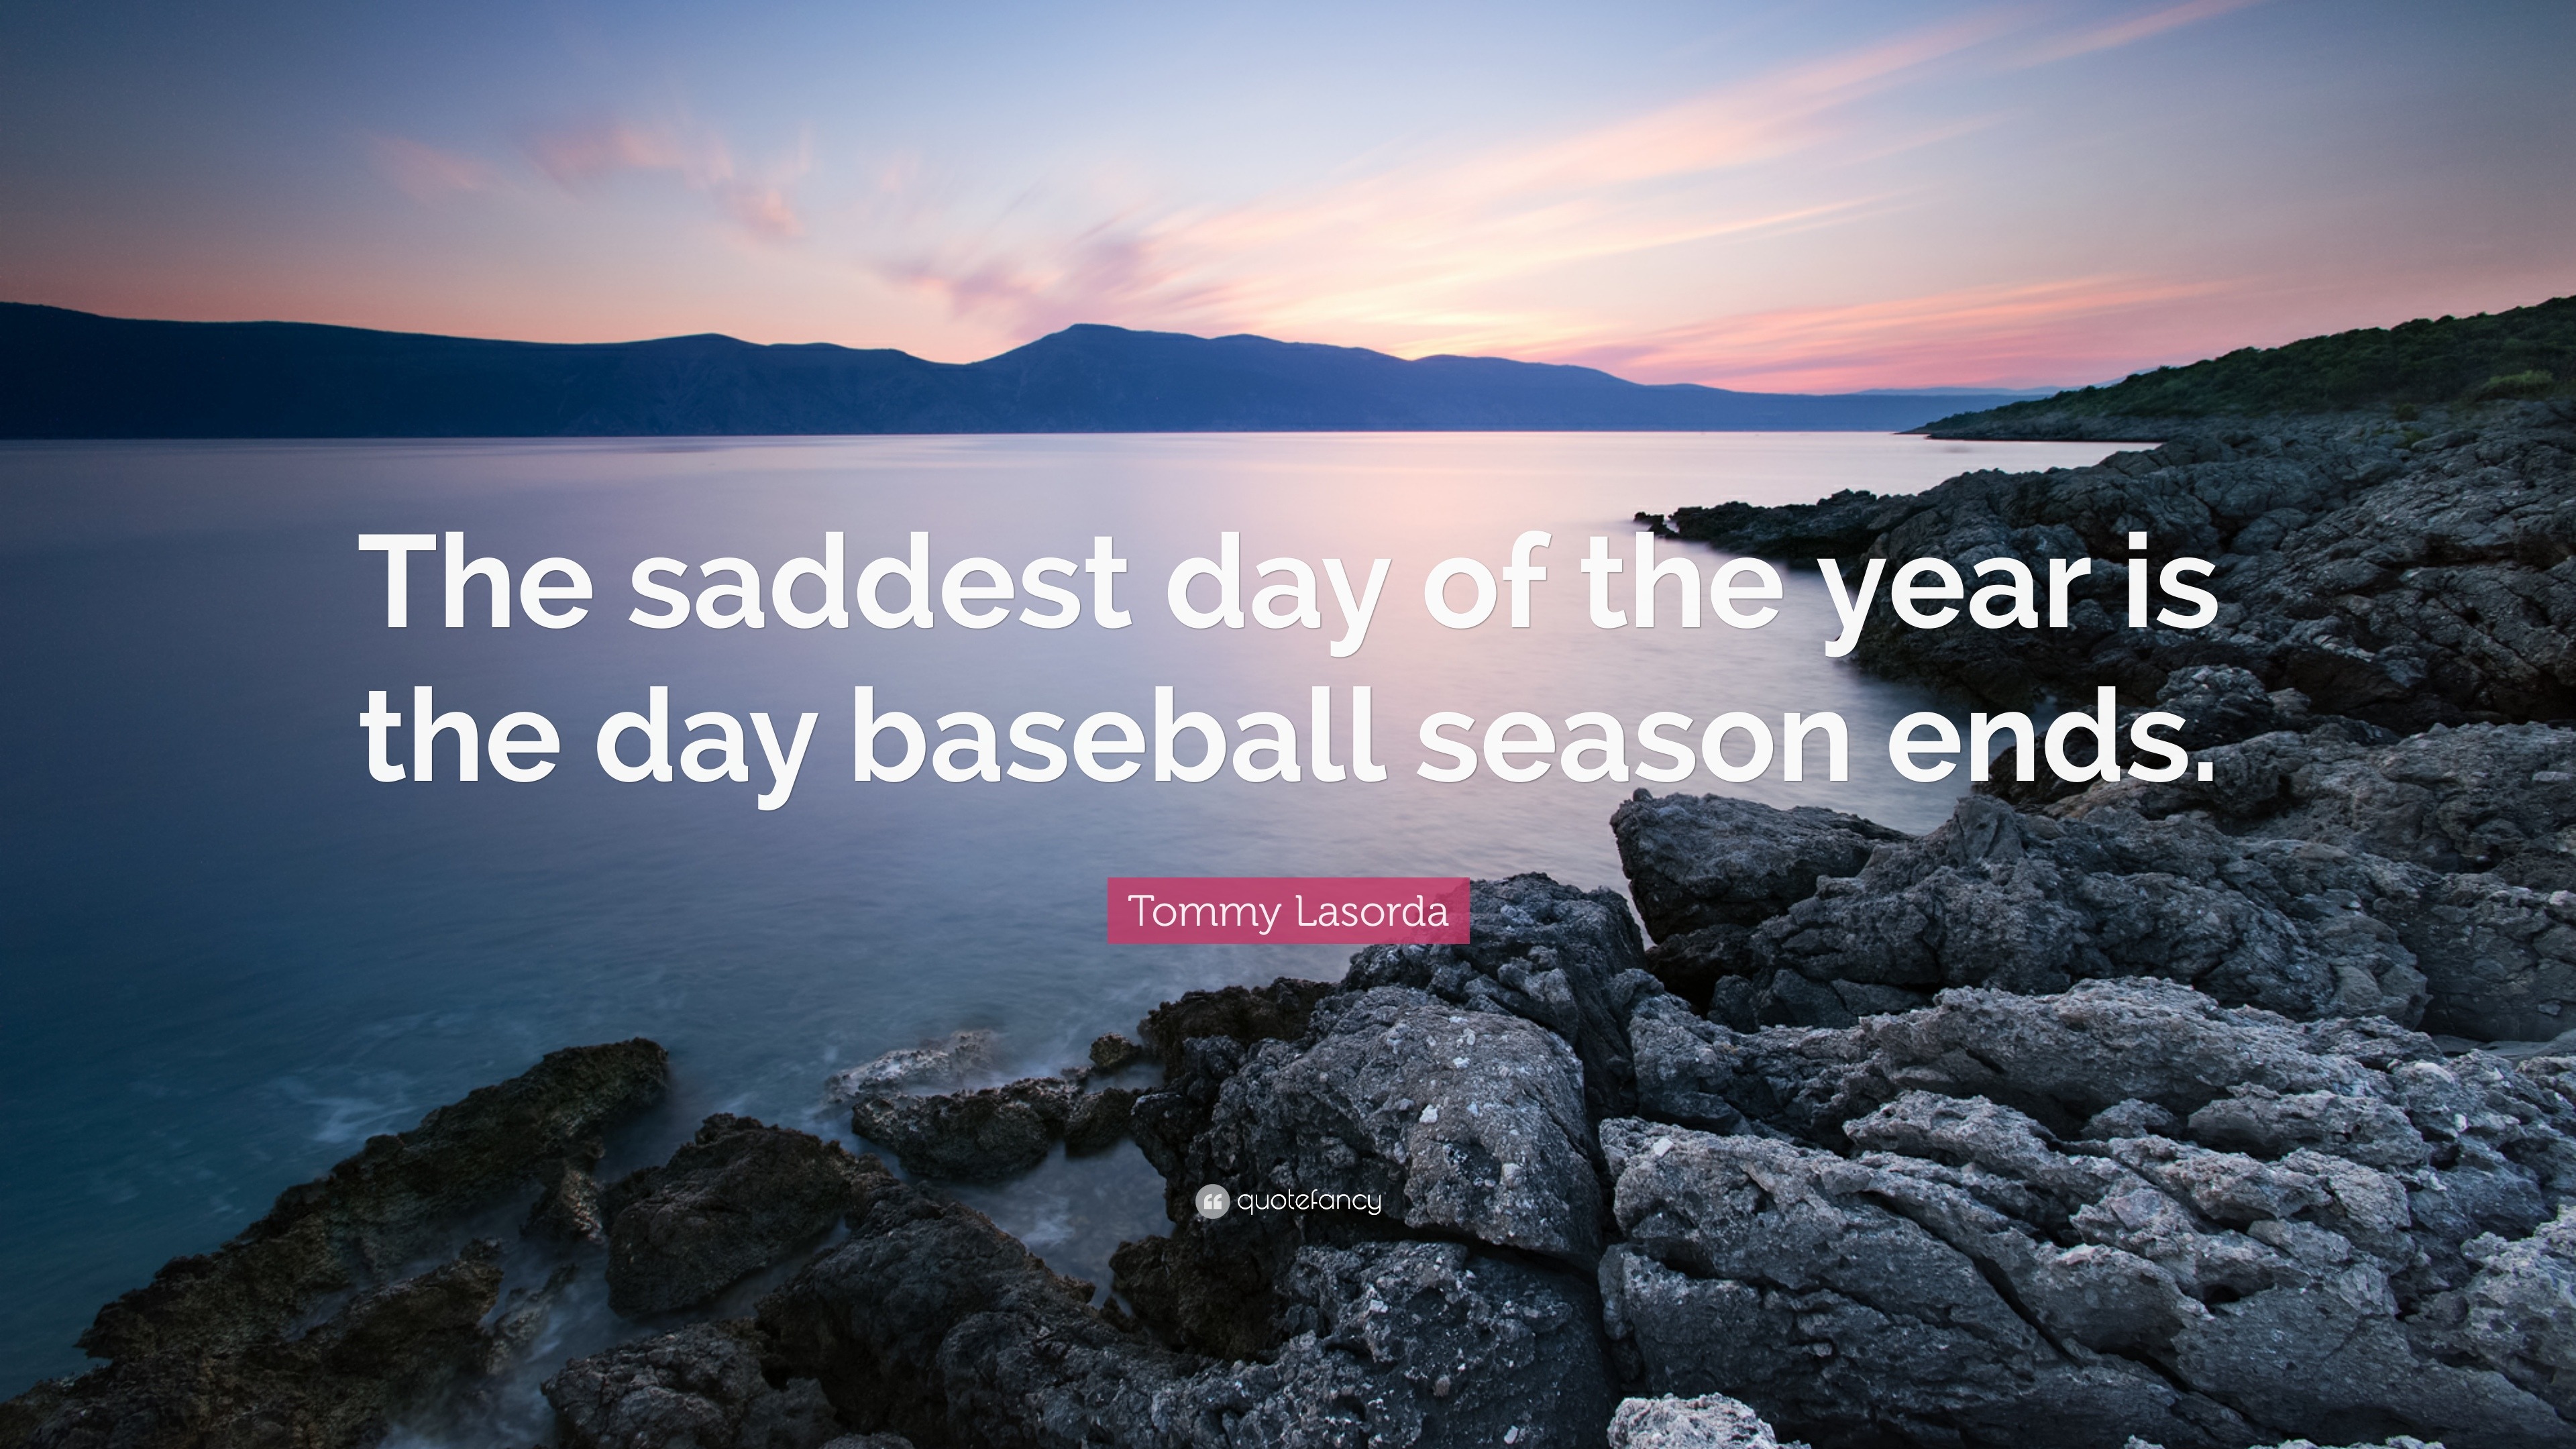 Inspiration of the day - Tommy Lasorda